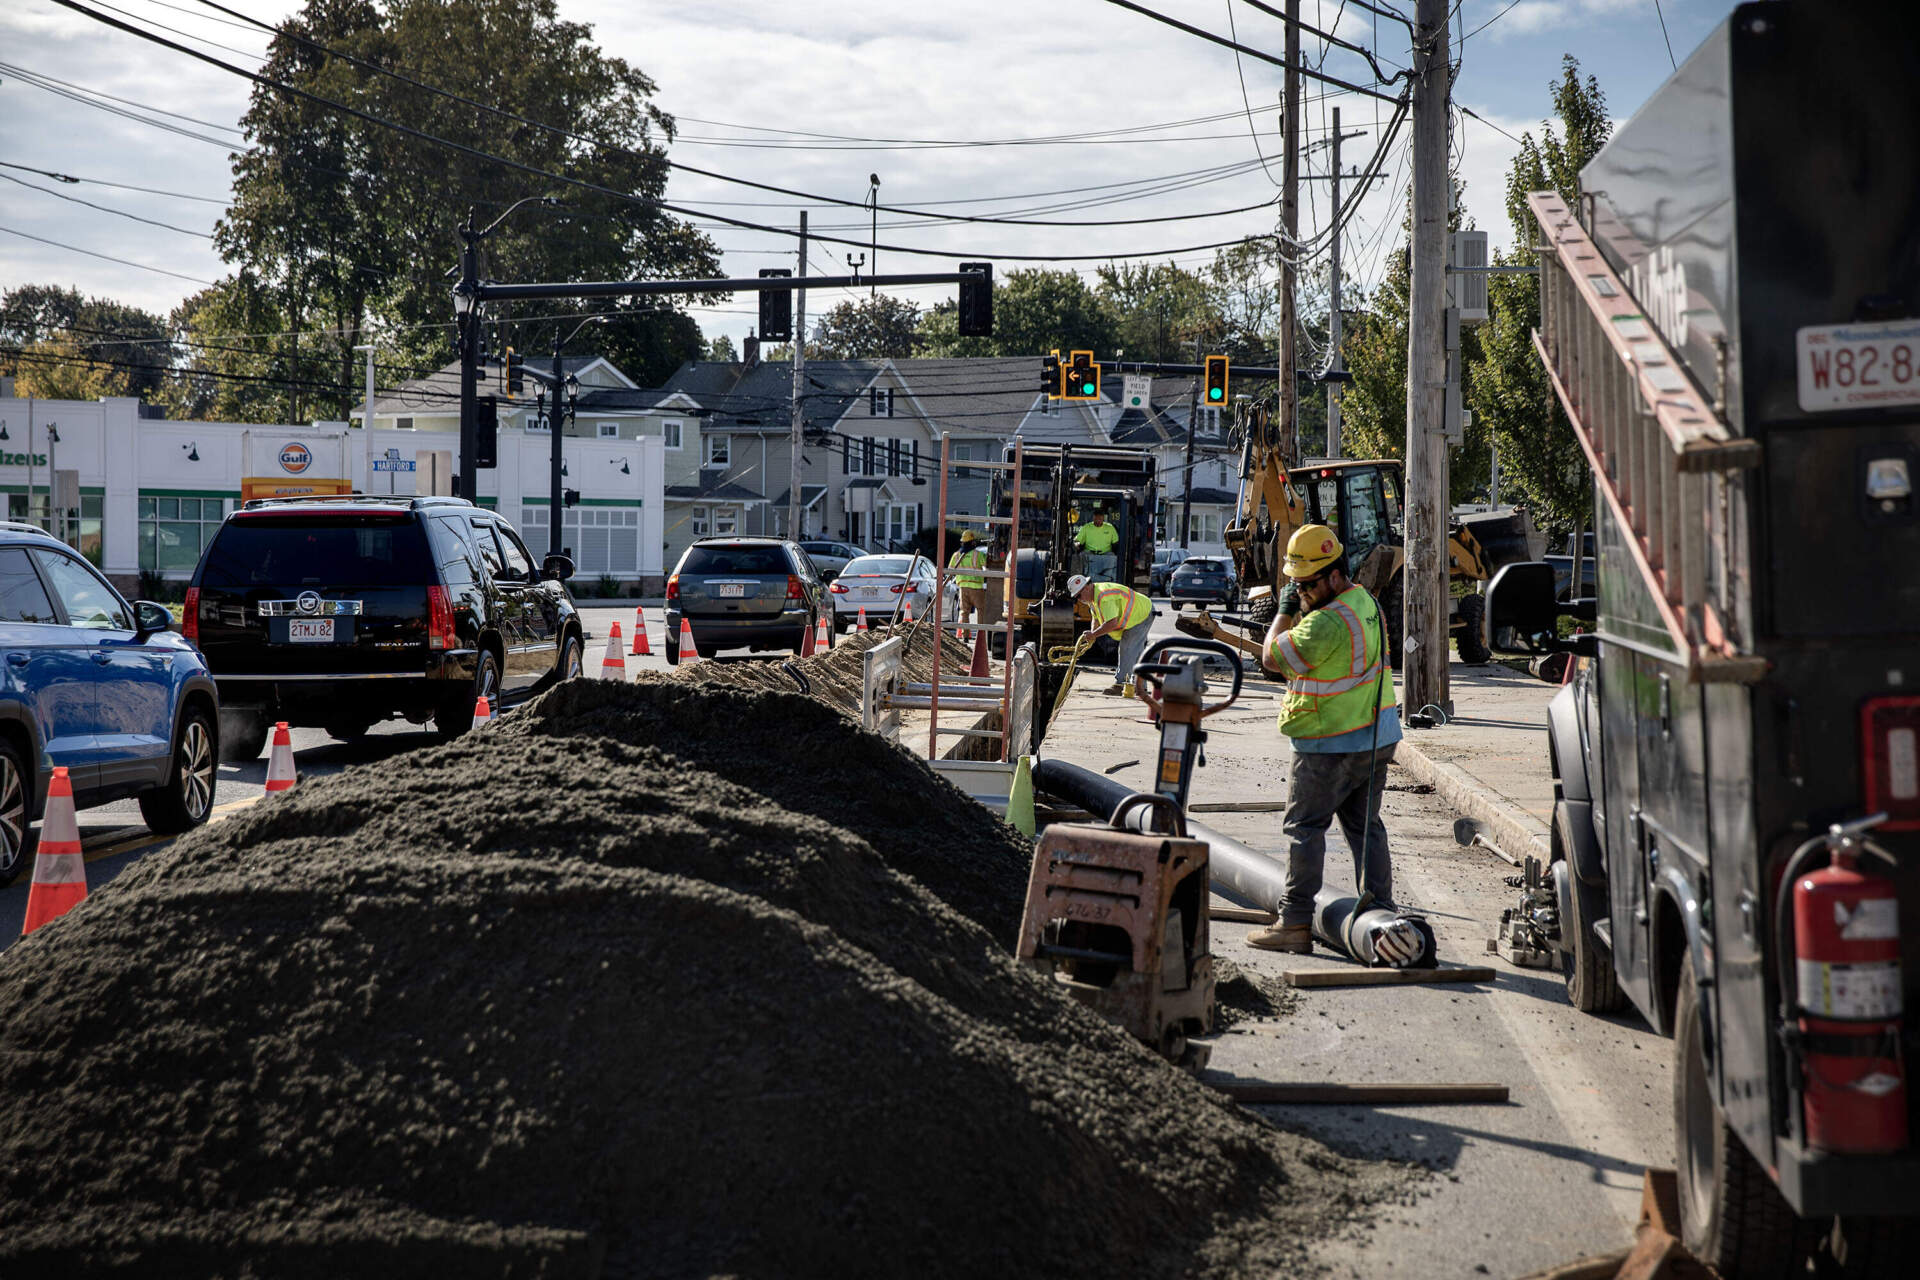 Workers lay geothermal pipe along Concord Street for Eversource's networked geothermal pilot project in Framingham. (Robin Lubbock/WBUR)